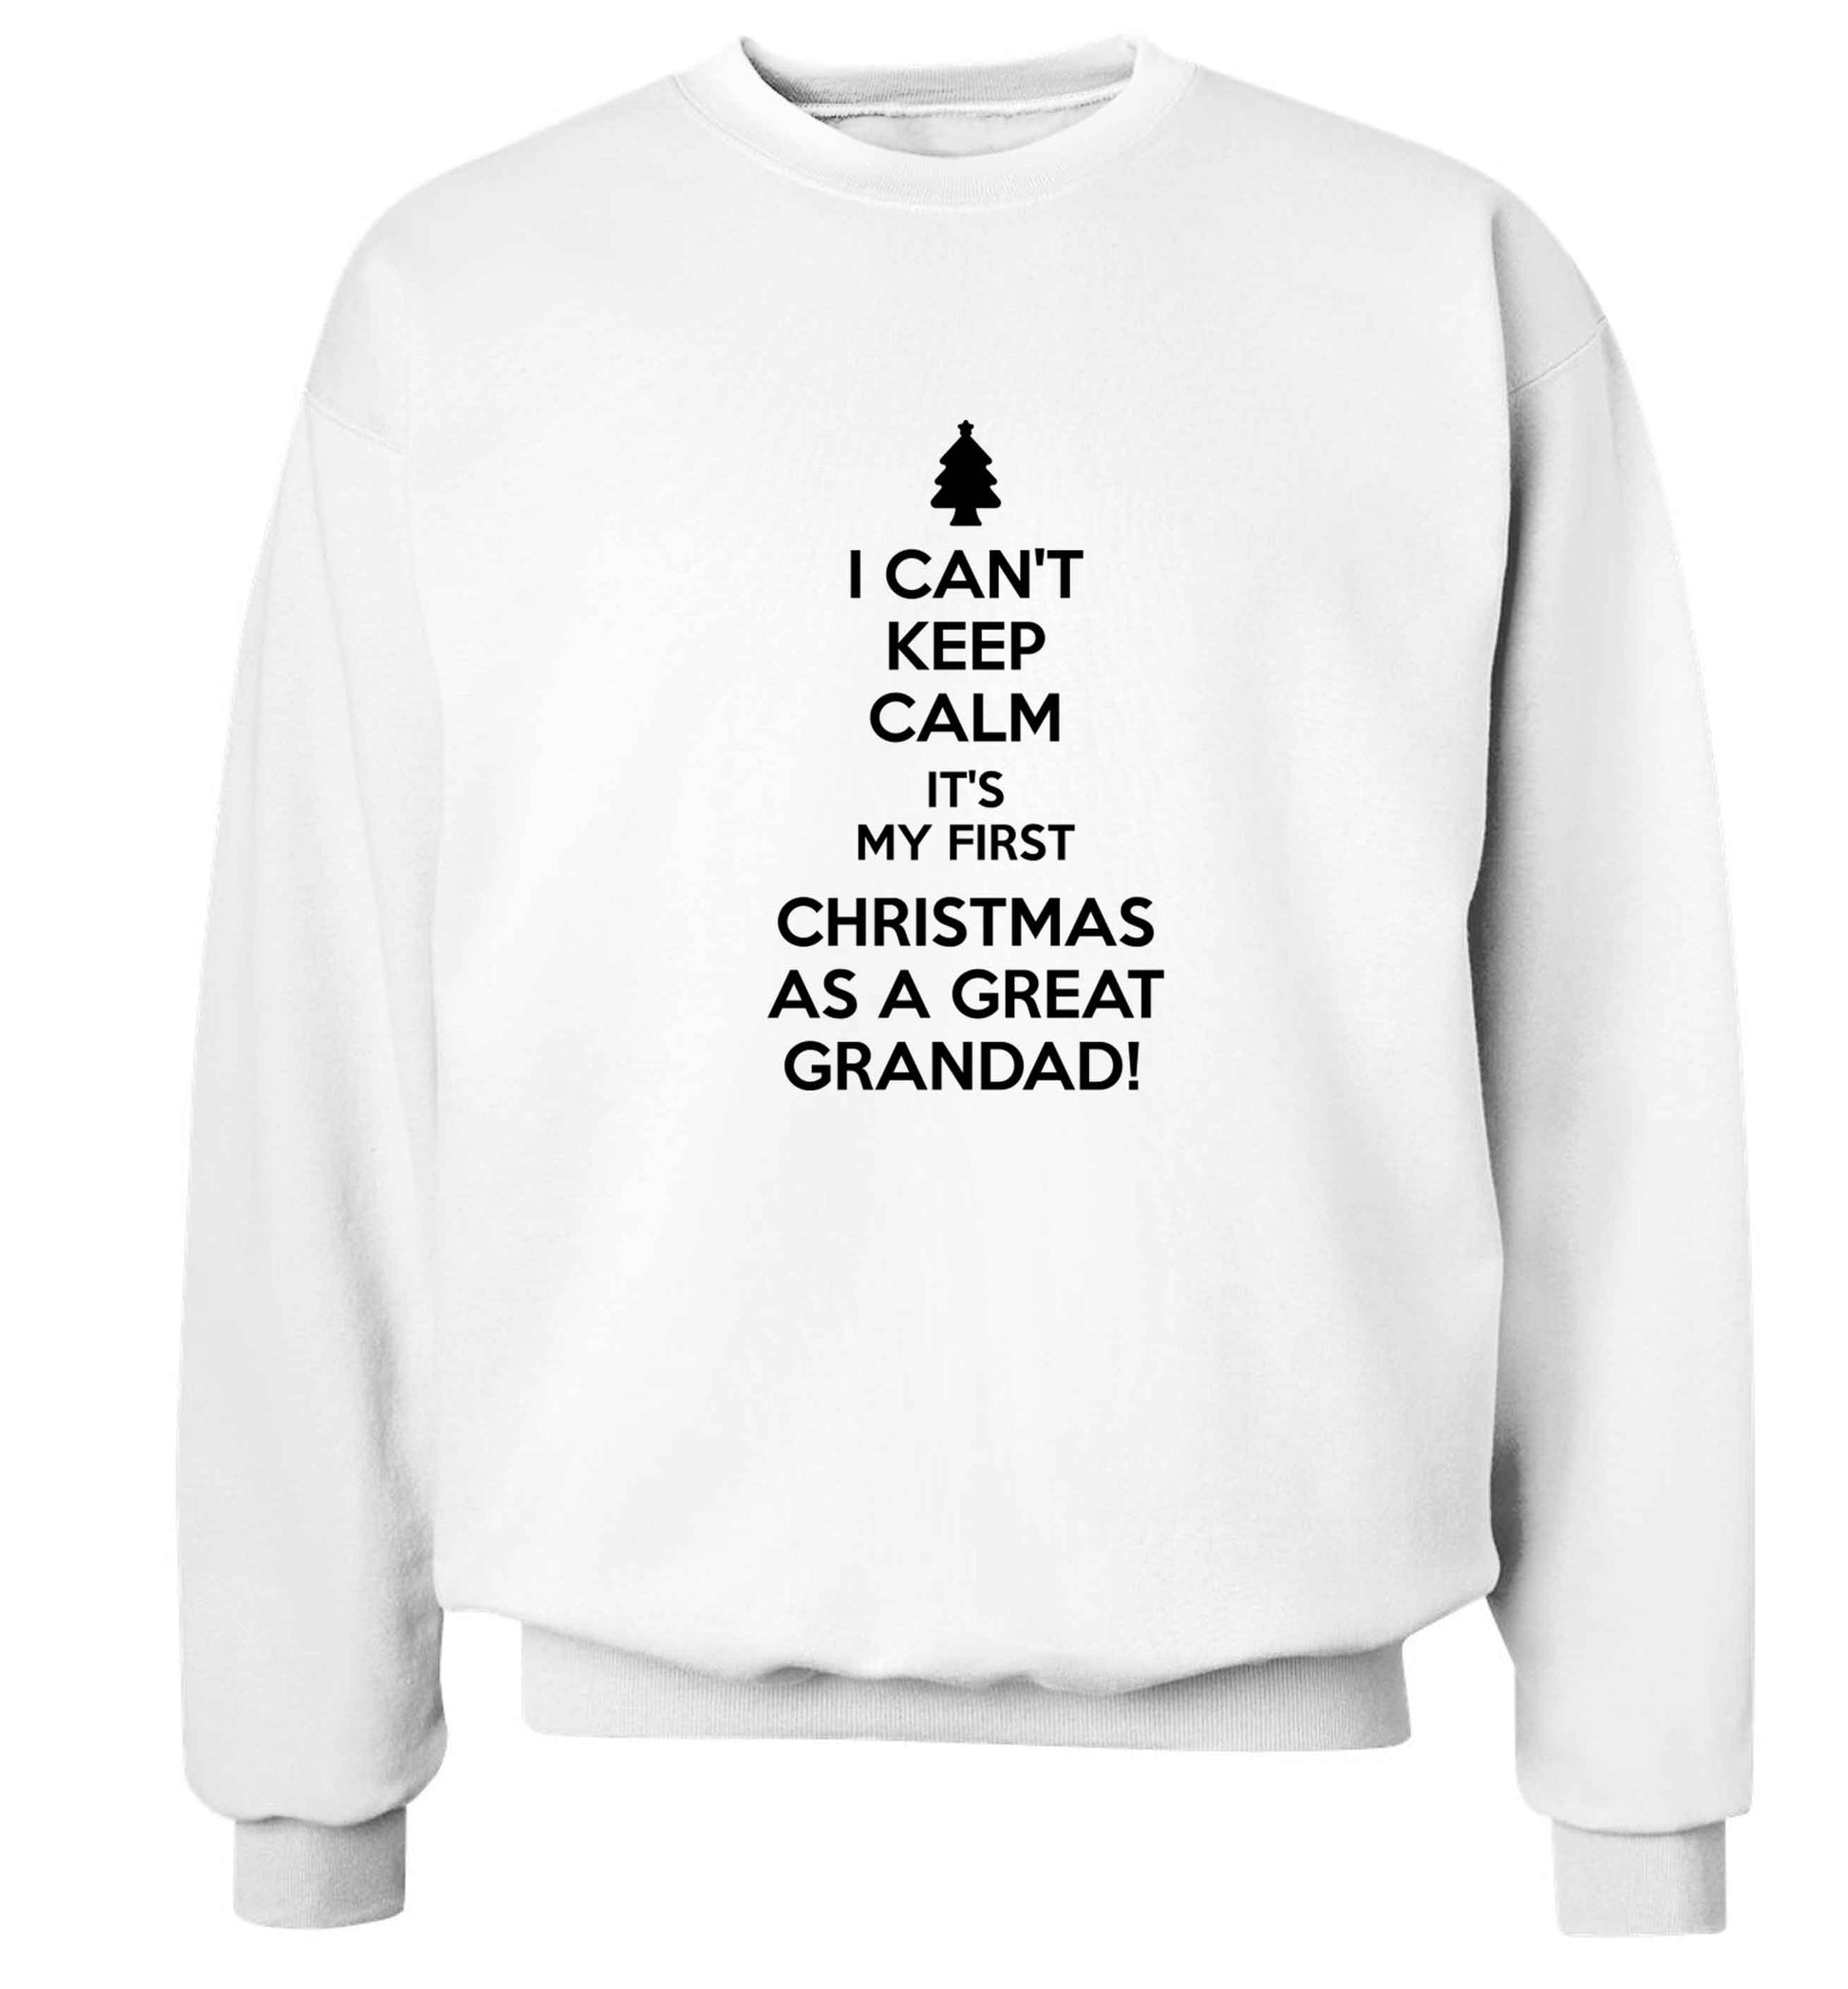 I can't keep calm it's my first Christmas as a great grandad! Adult's unisex white Sweater 2XL